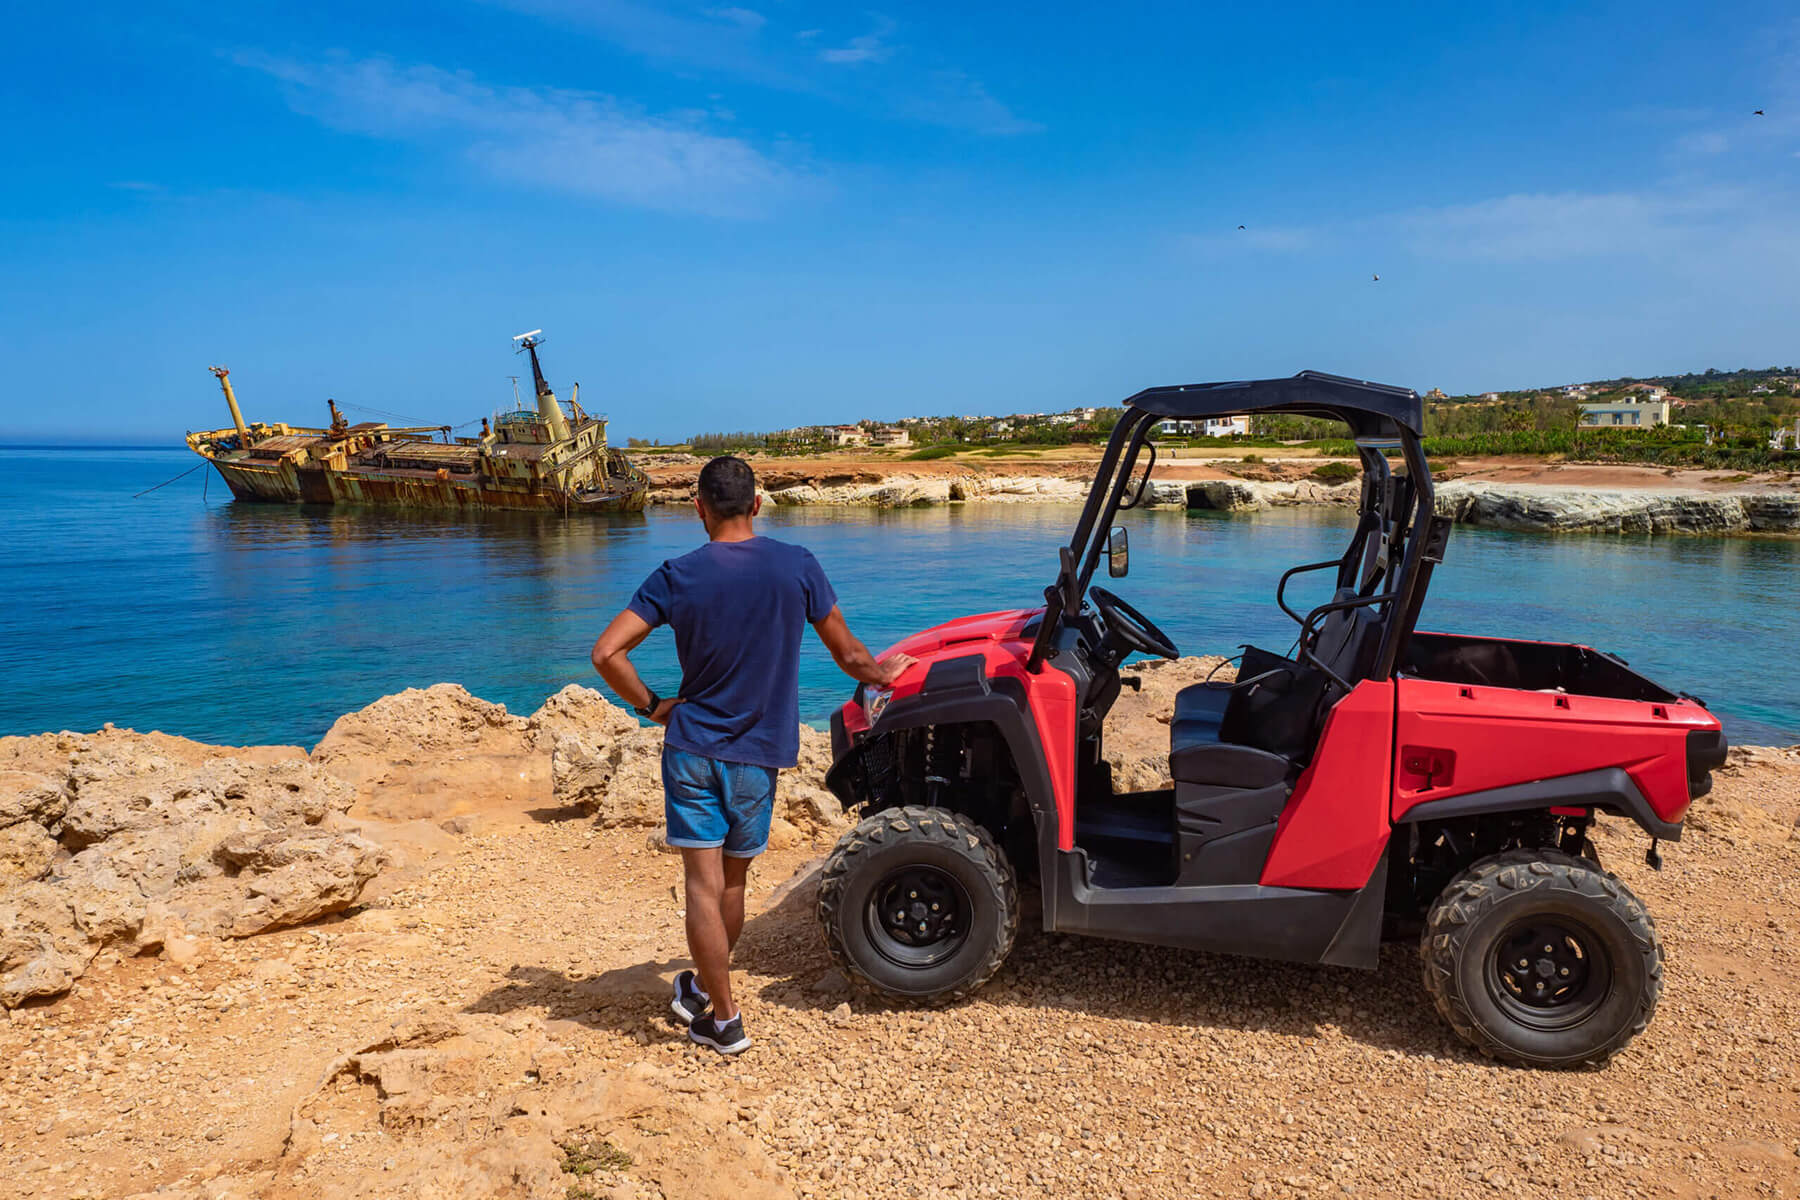 A Guide to Shipping Recreational Vehicles: ATVs, UTVs, and More